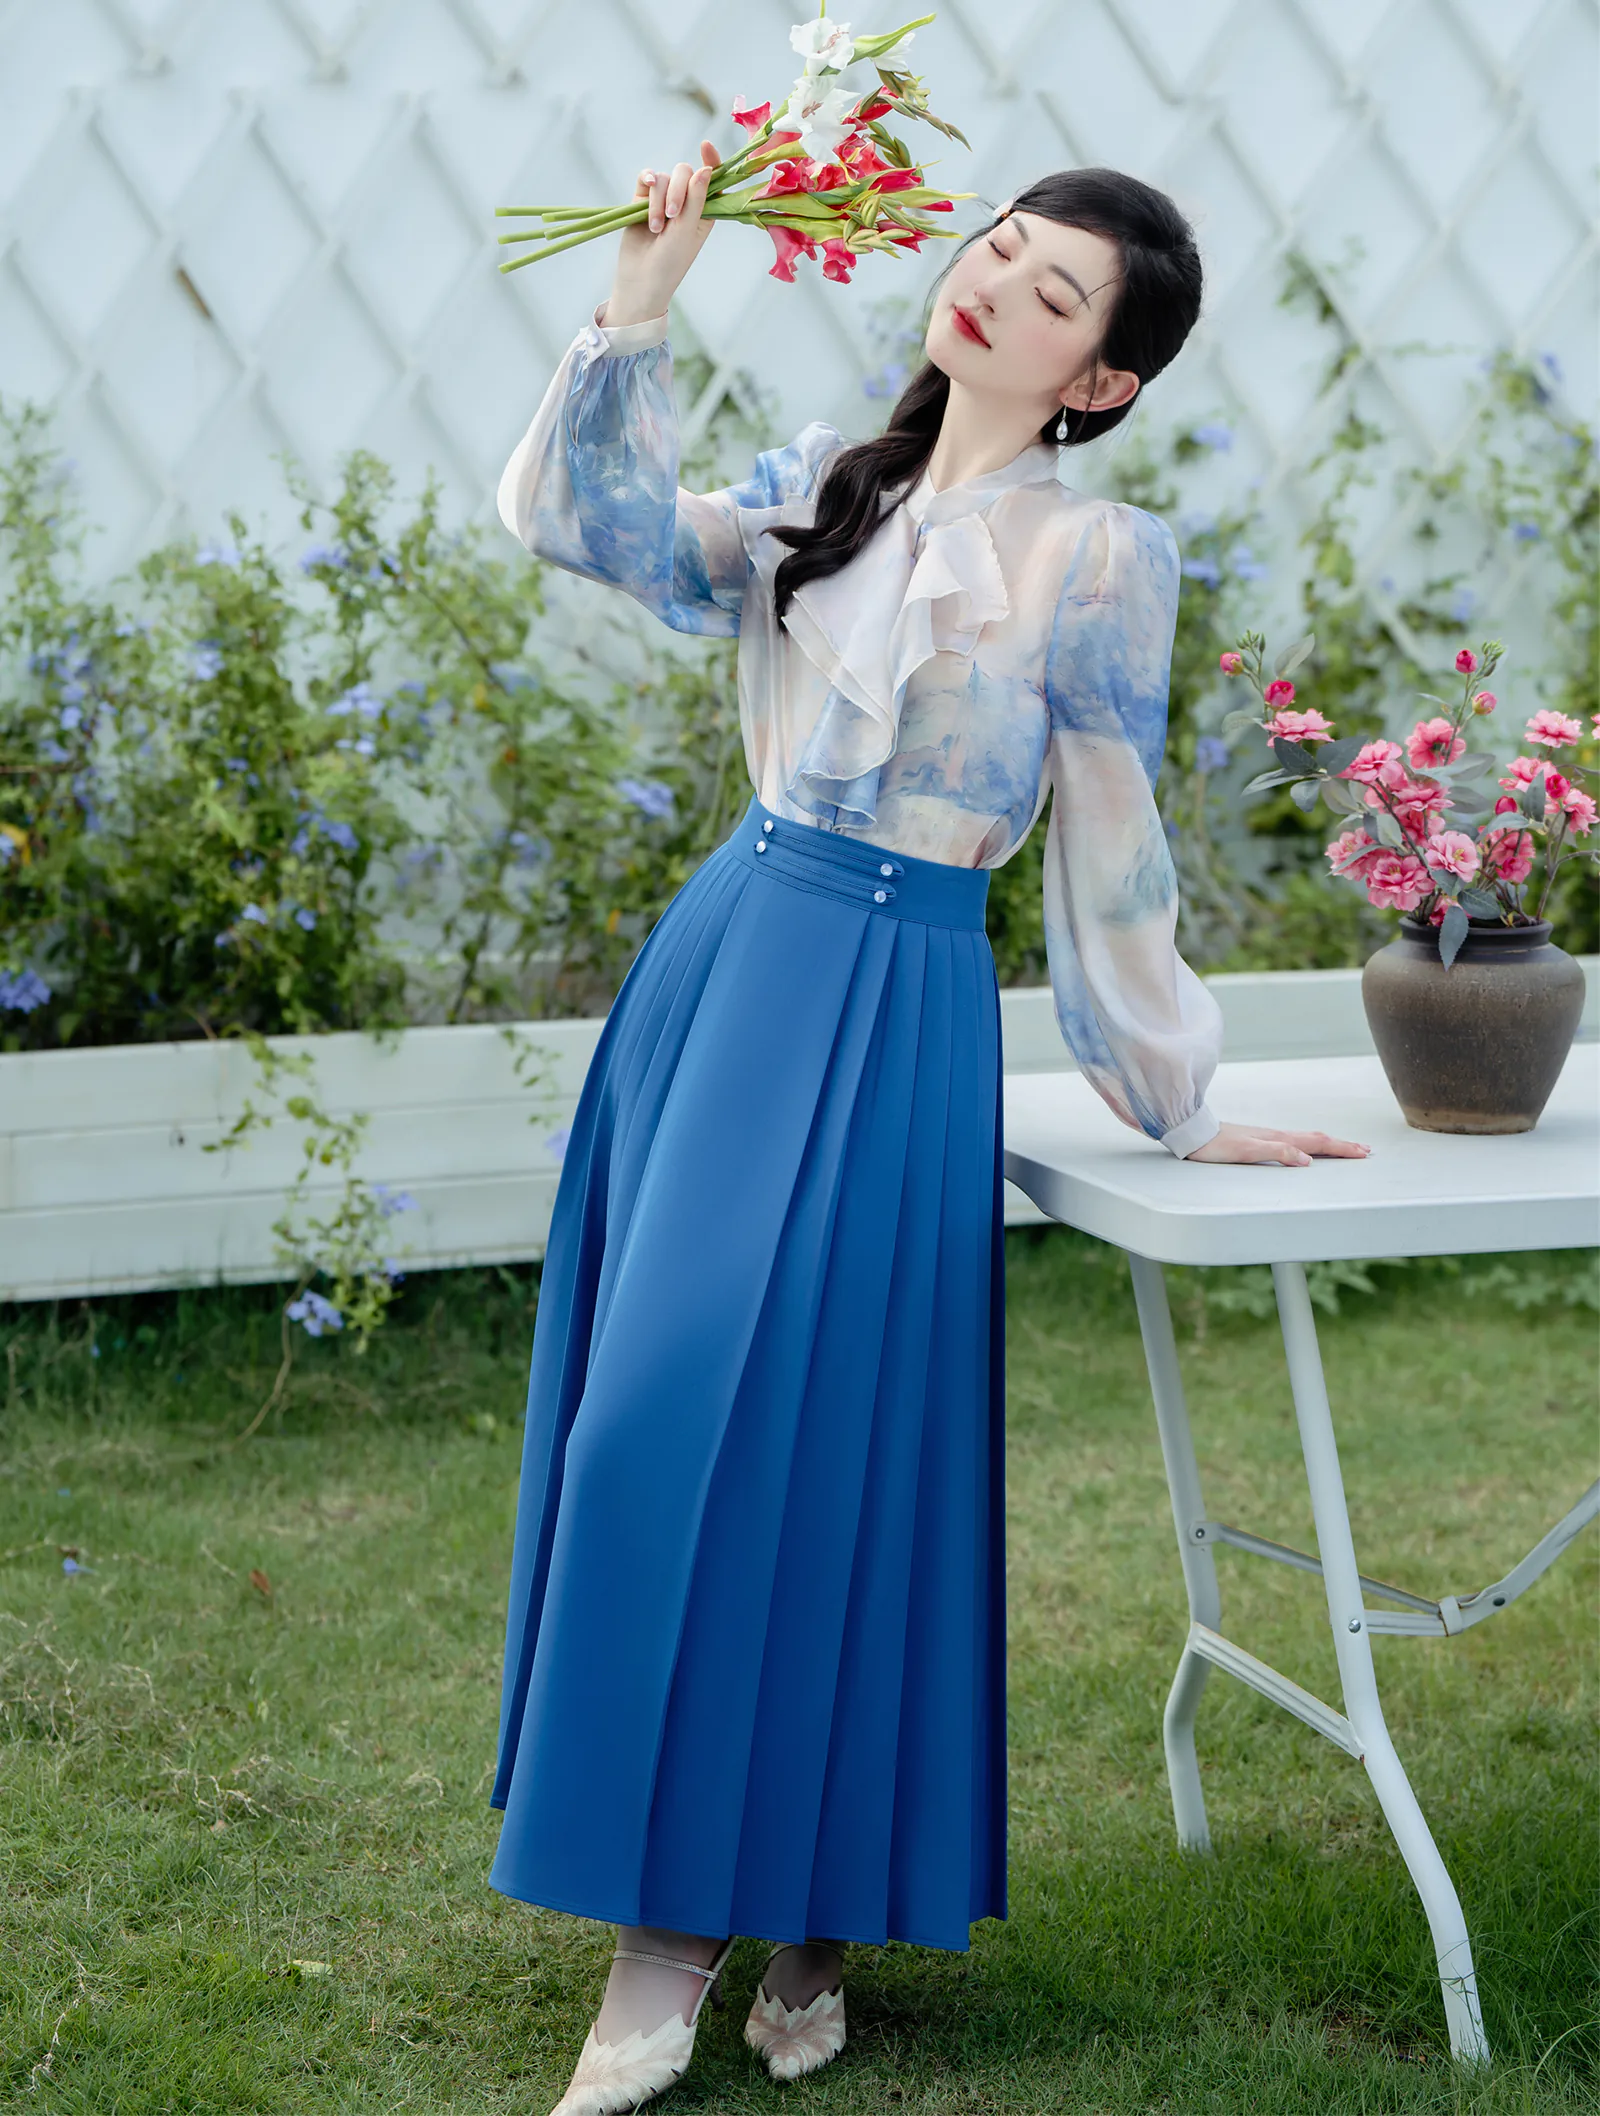 Romantic French Style Oil Painting Top with Blue Skirt Casual Outfit Suit05